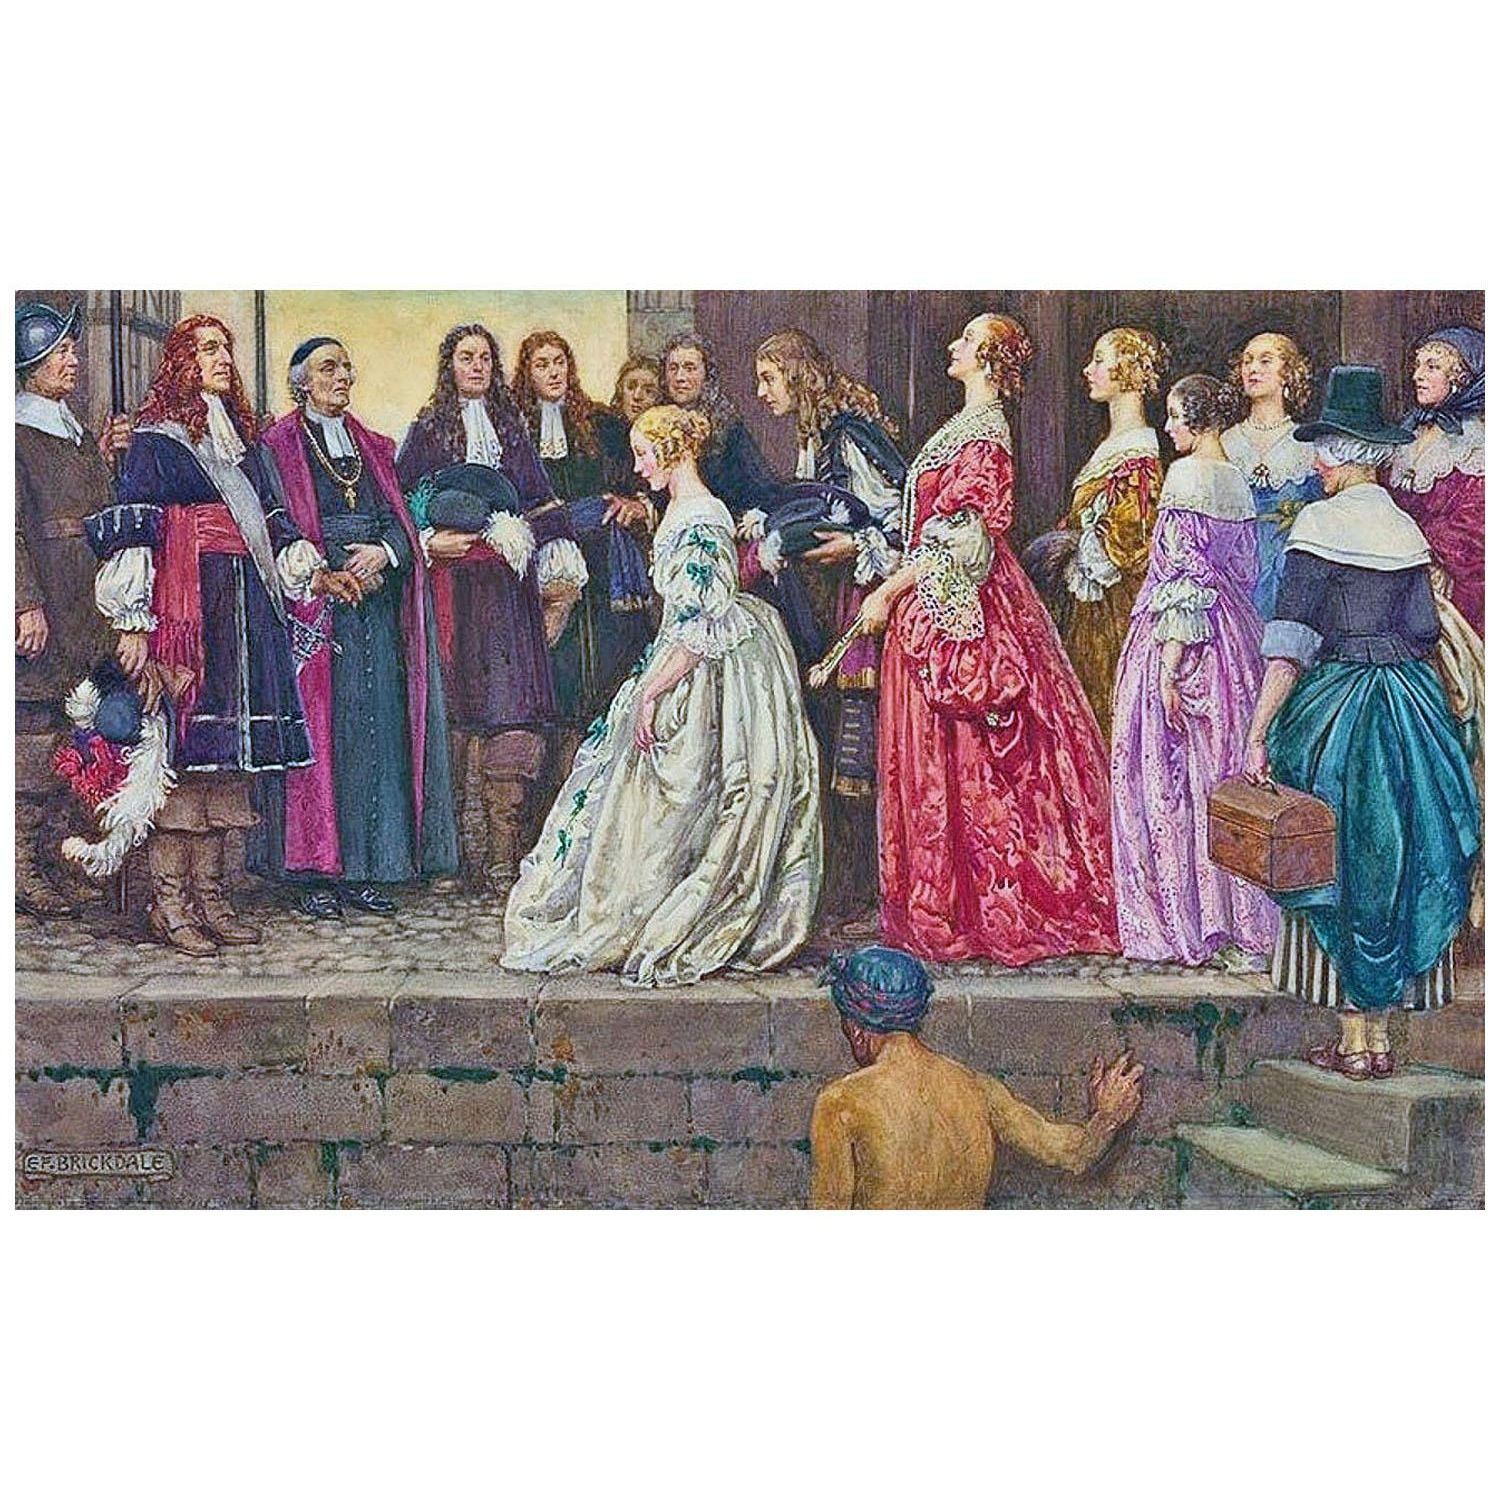 Eleanor Fortescue-Brickdale. Arrival of the Brides. 1907